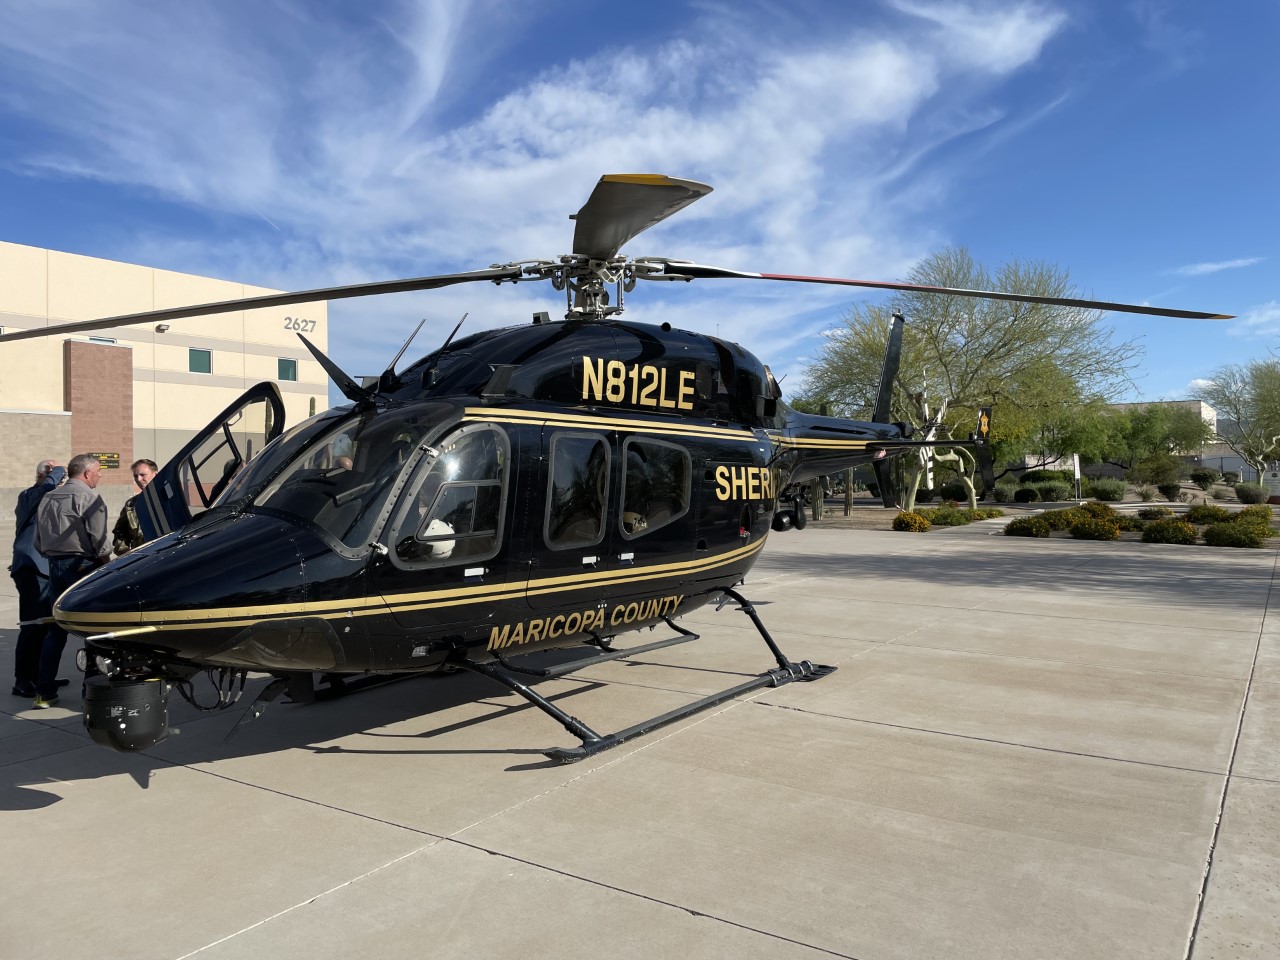 Maricopa County Sheriff Office's Helicopter